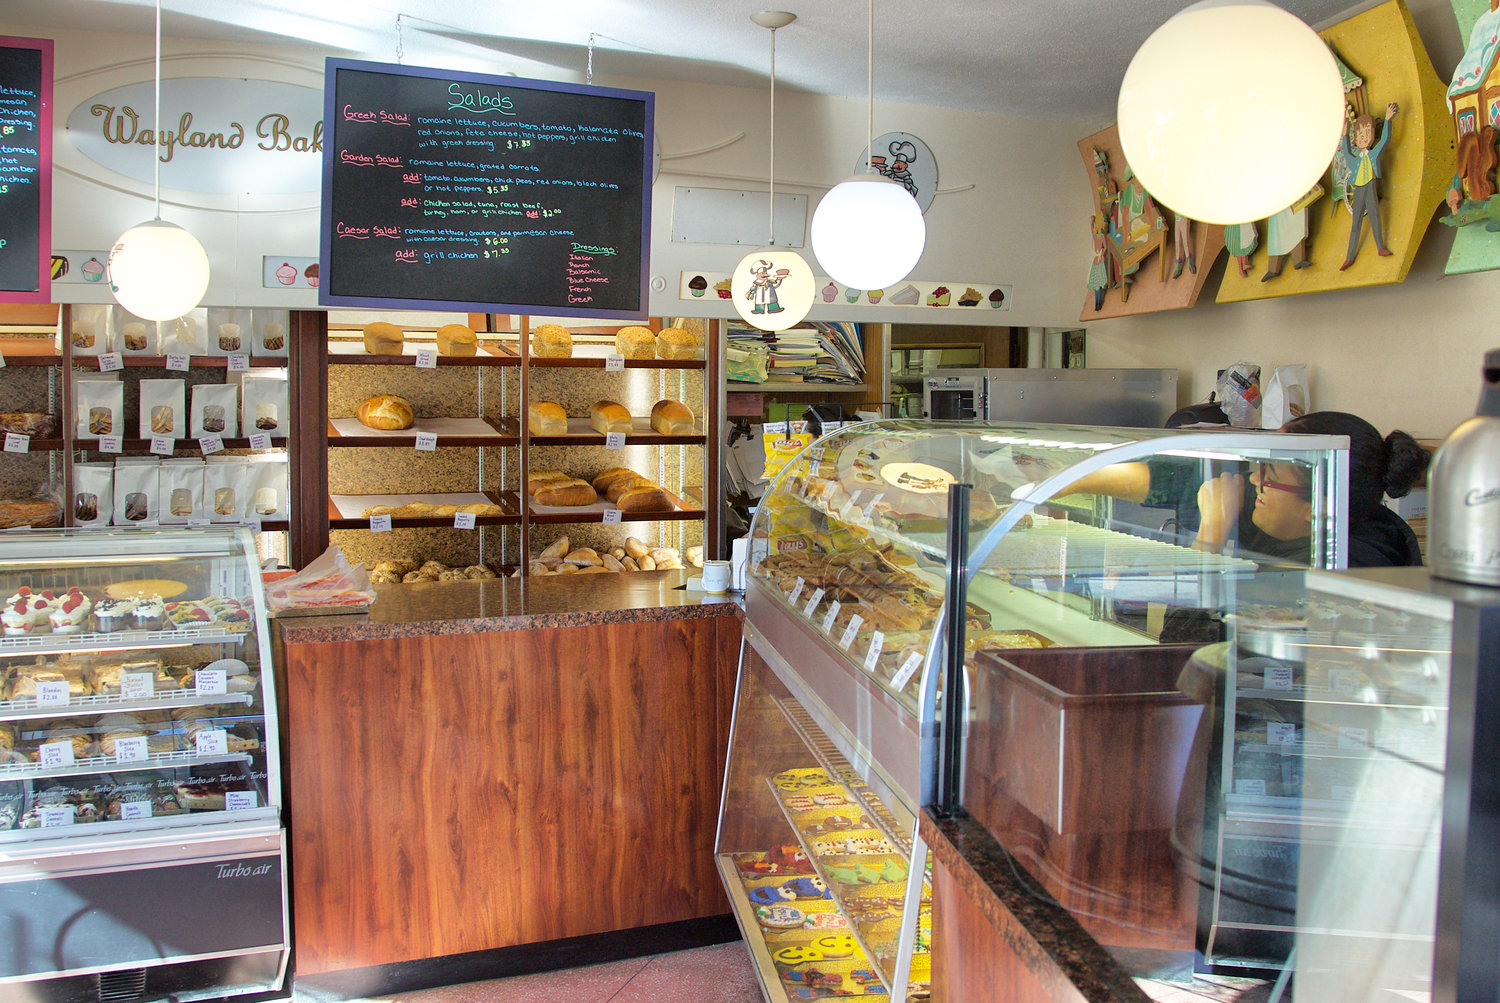 Inside Wayland Bakery during its prime